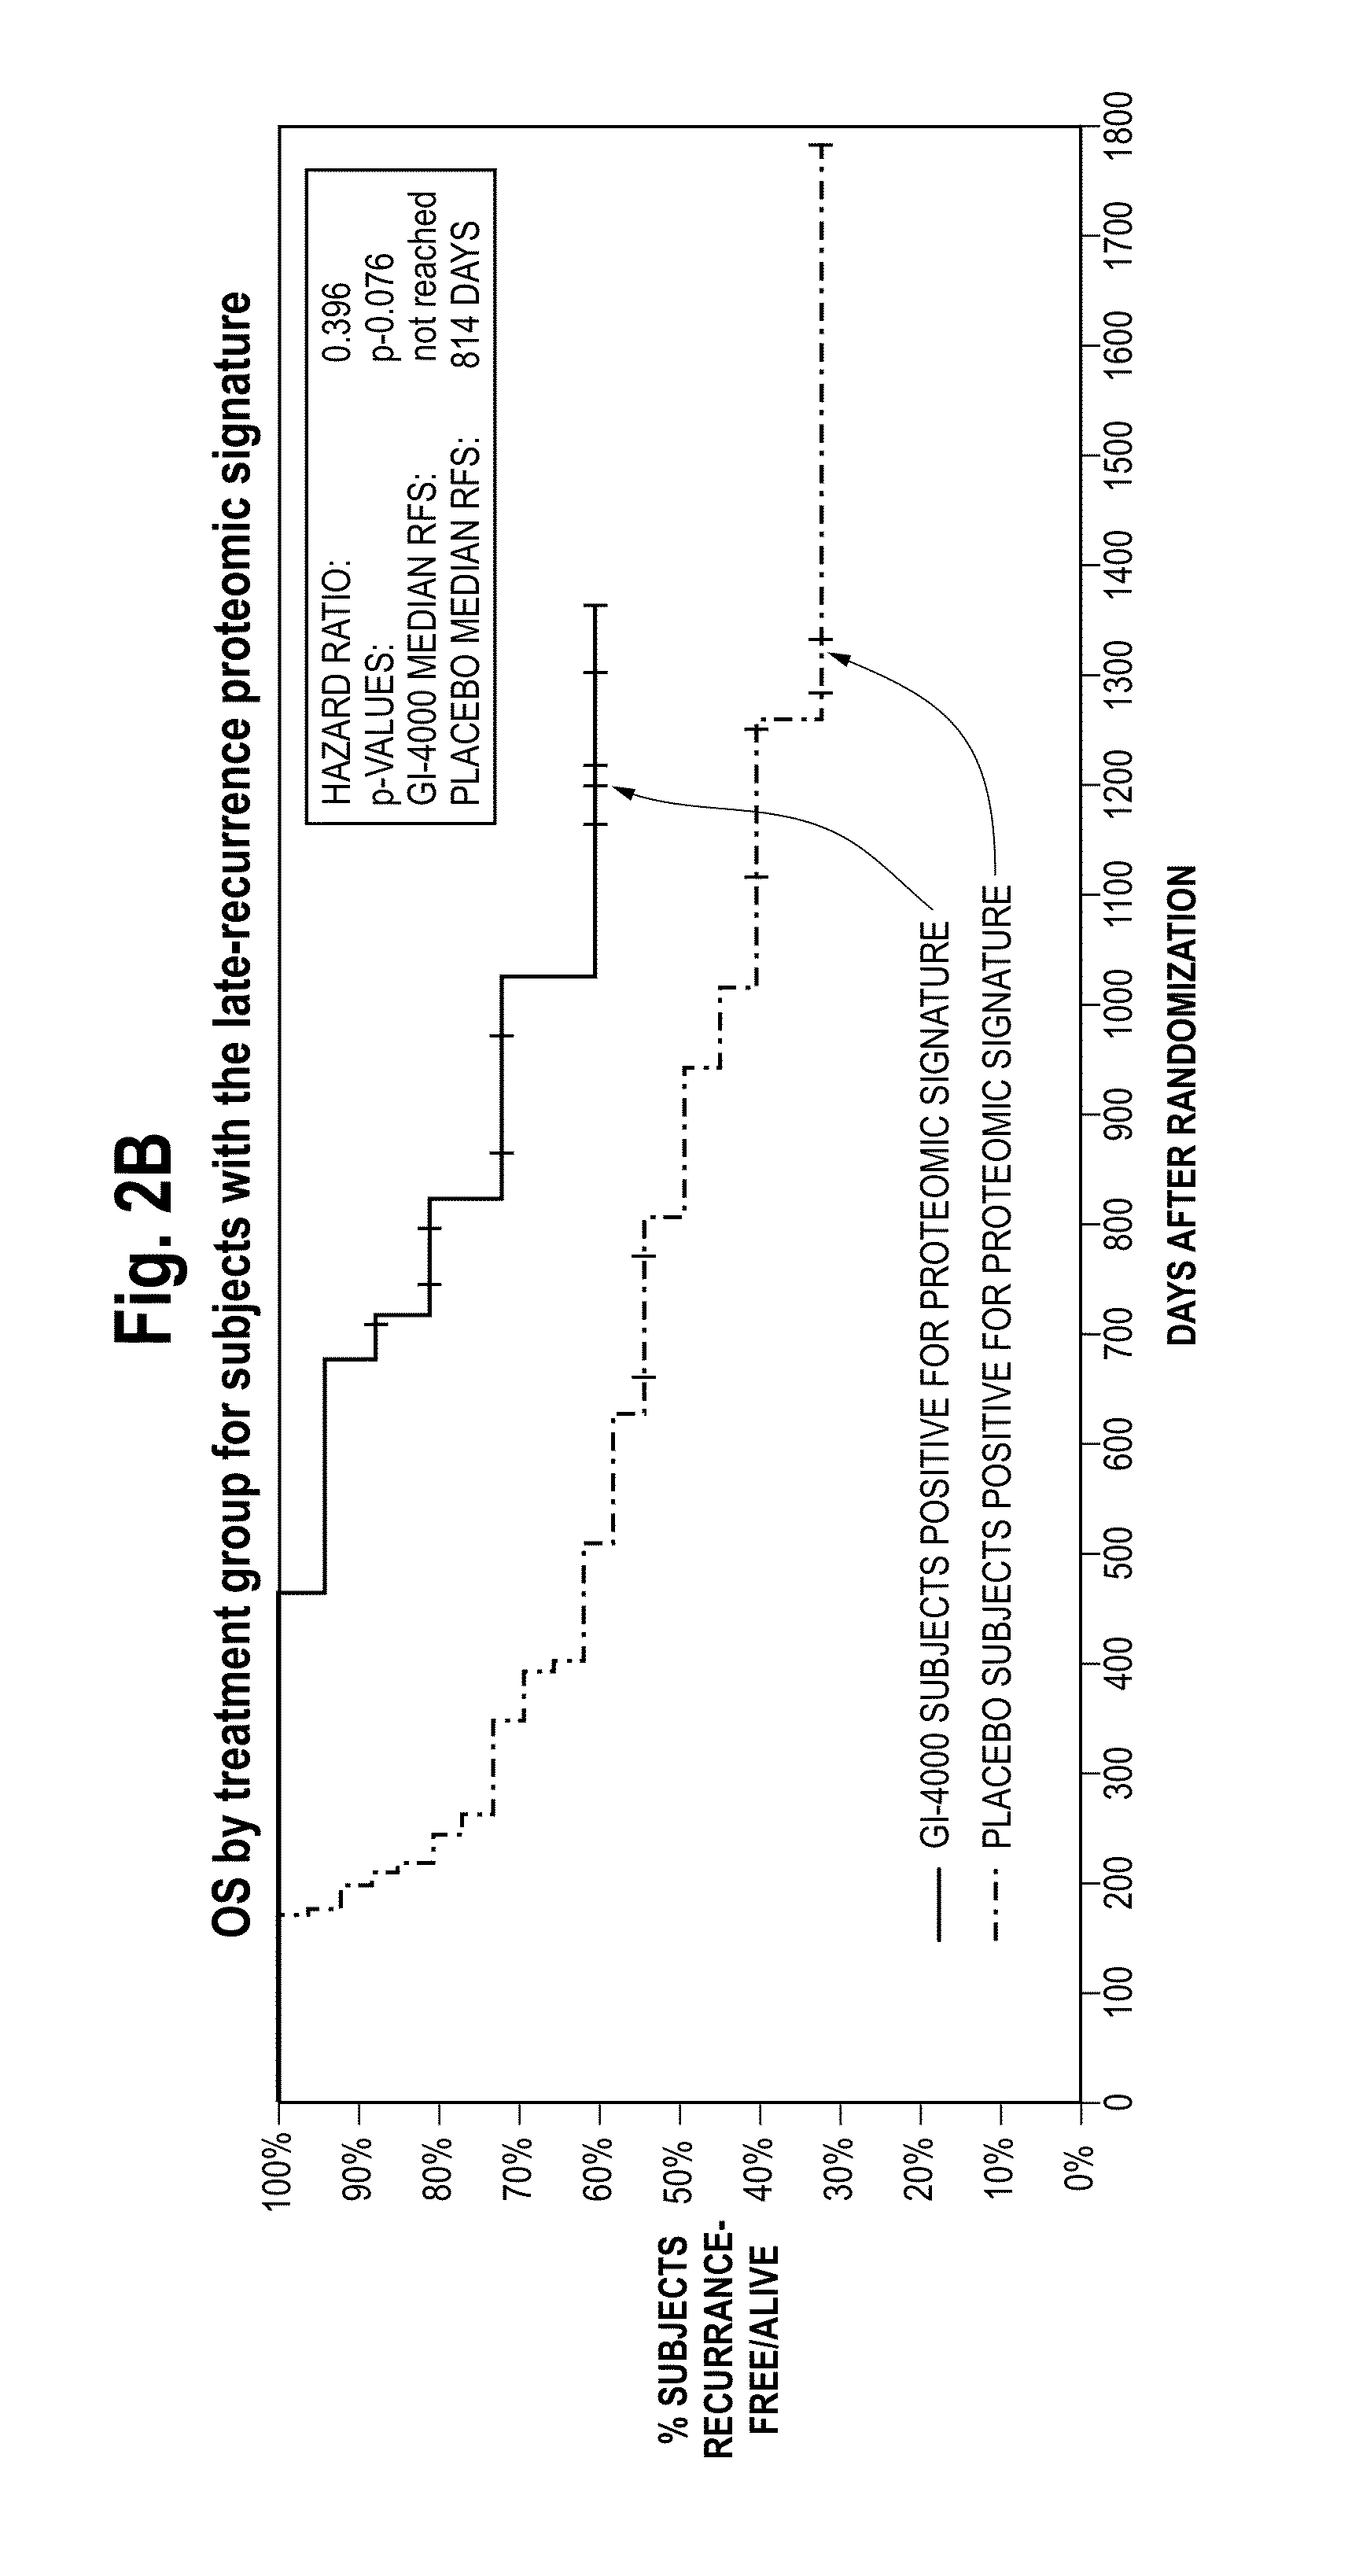 Mass-Spectral Method for Selection, and De-Selection, of Cancer Patients for Treatment with Immune Response Generating Therapies